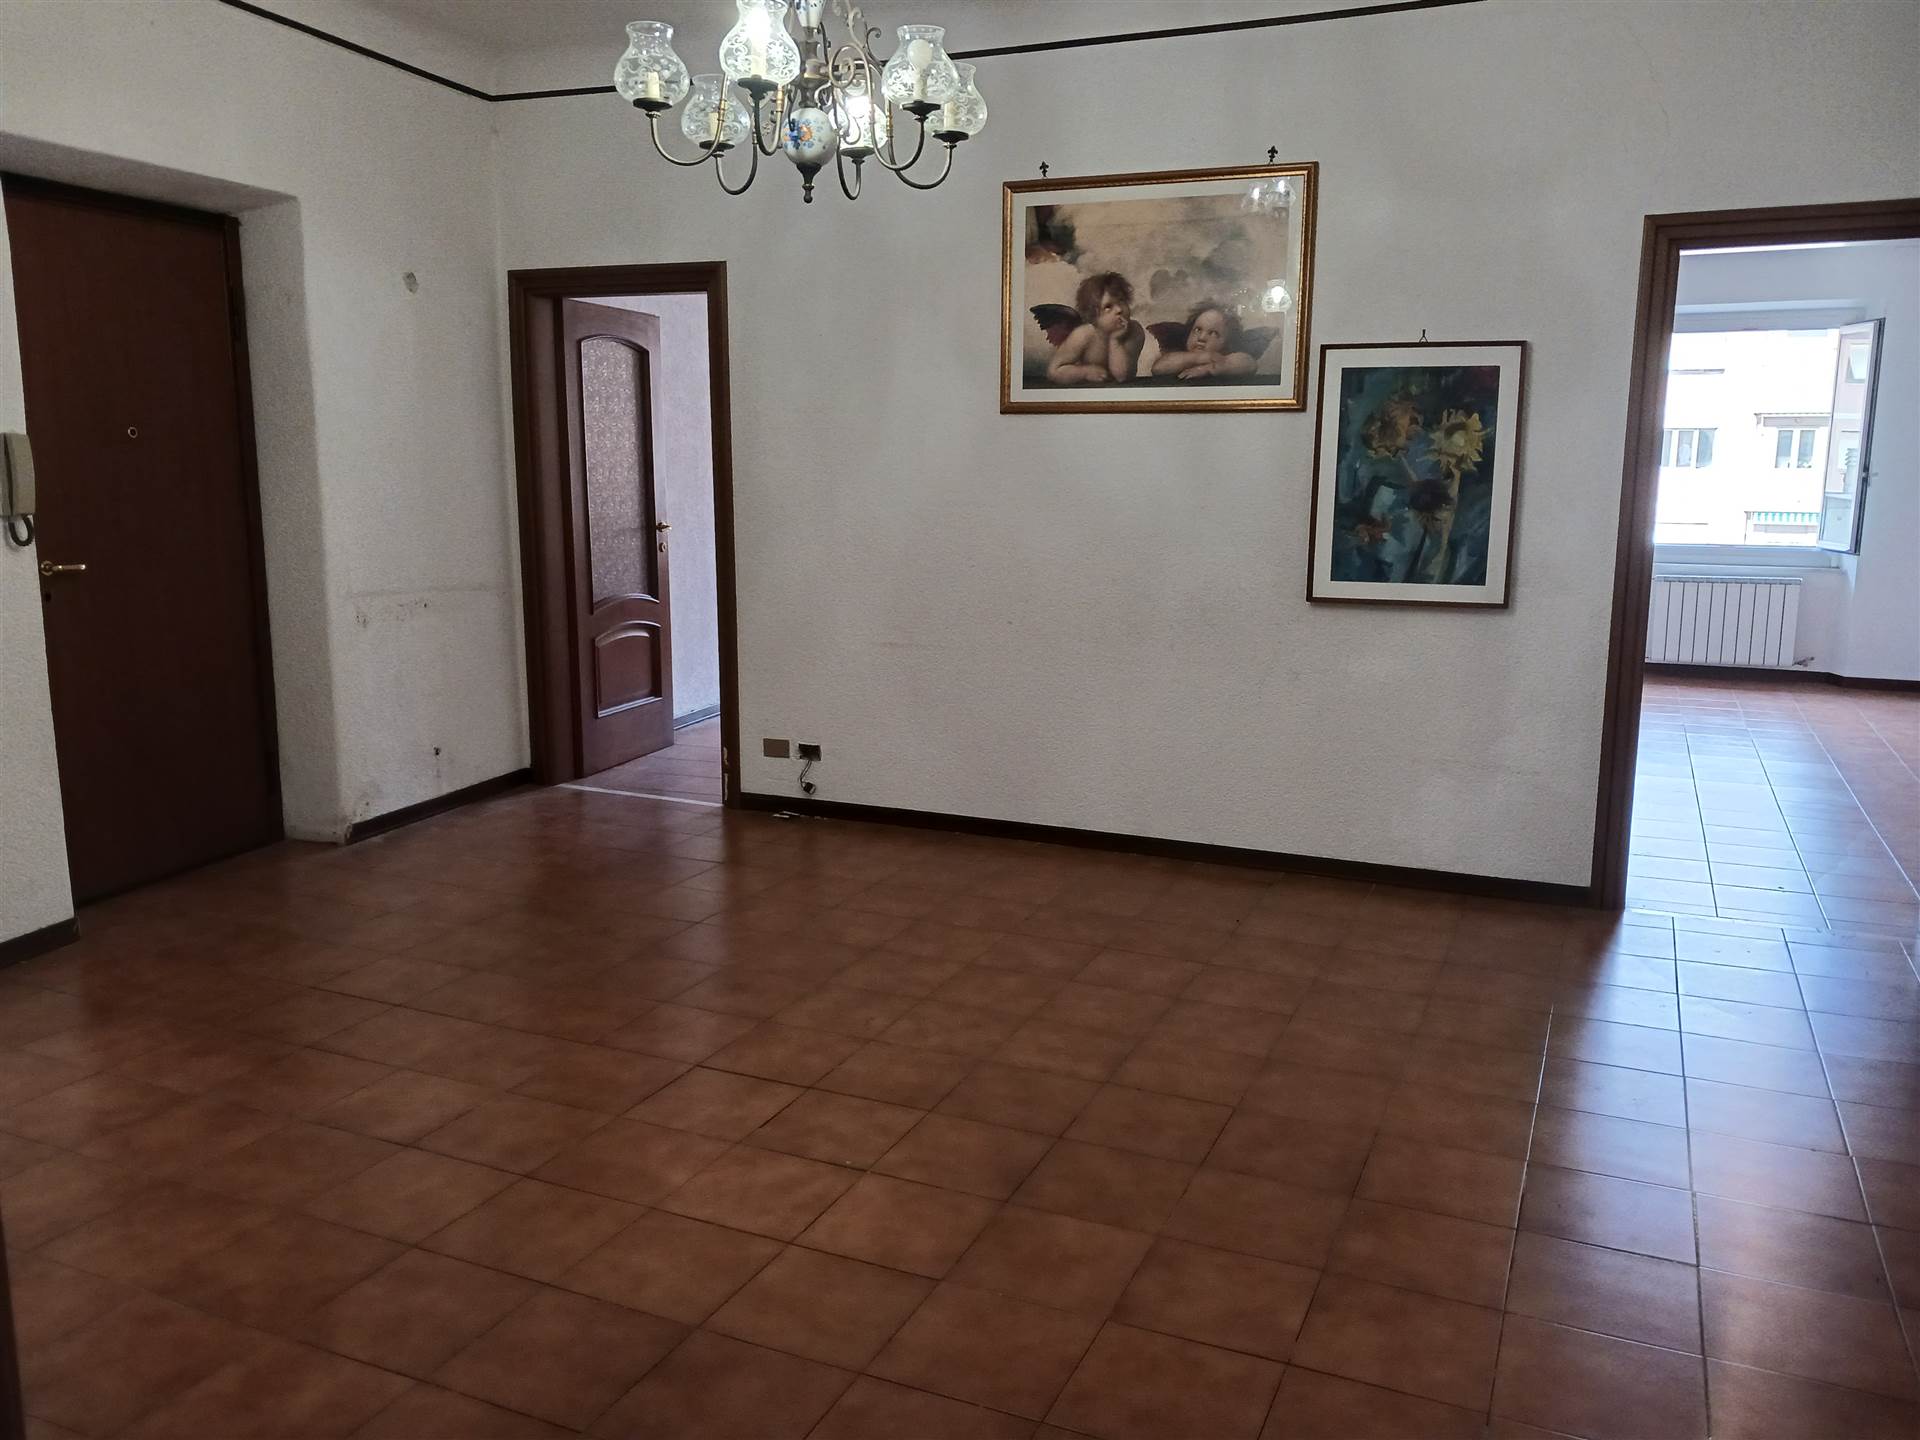 LAVAGNOLA, SAVONA, Apartment for sale of 80 Sq. mt., Habitable, Heating Individual heating system, Energetic class: E, placed at 4° on 5, composed 